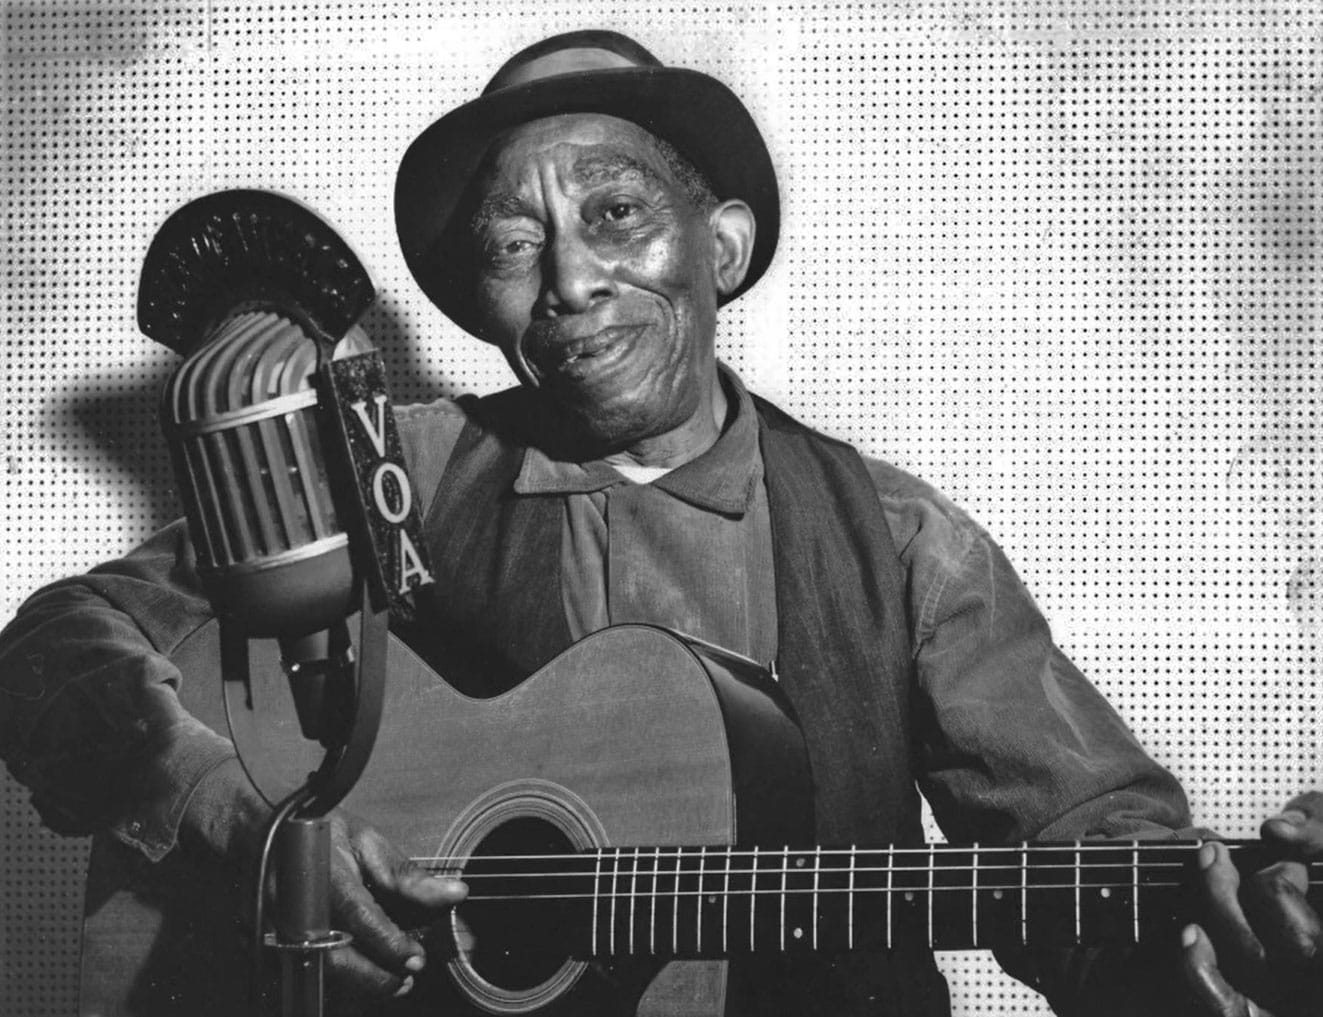 Mississippi John Hurt, pictured playing guitar in a VOA radio session